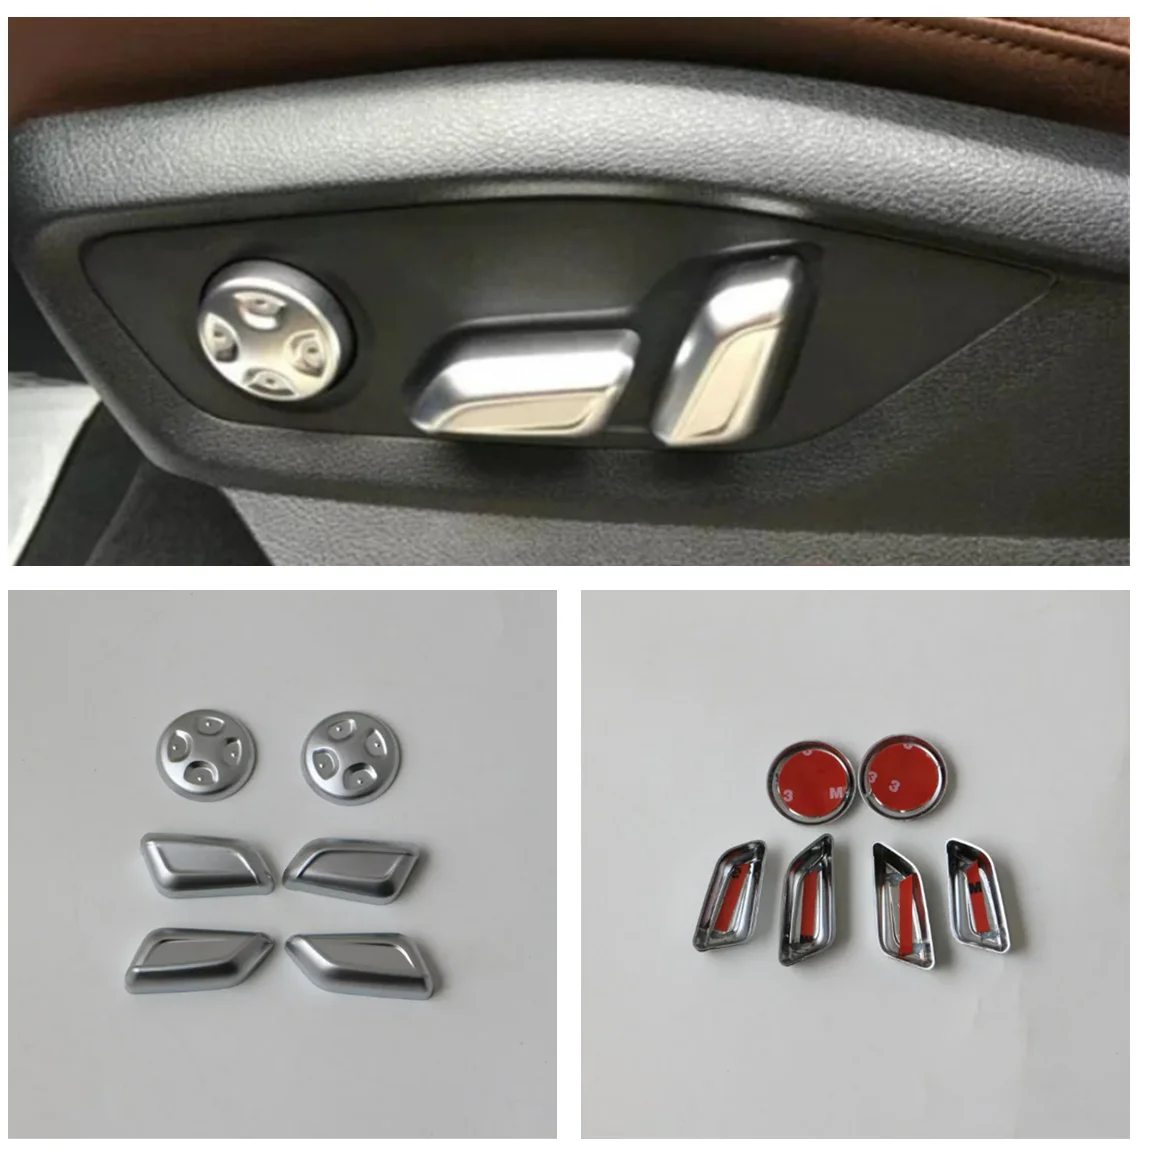 

For Audi Q7 2016 2017 2018 2019 Accessories Seat Adjustment Adjust Memory Button Switch Frame Molding Cover Kit Trim